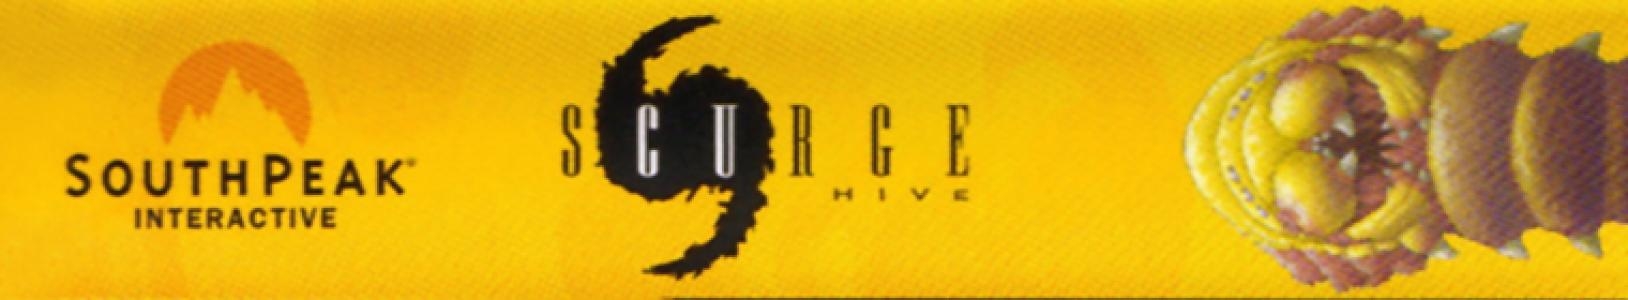 Scurge: Hive banner